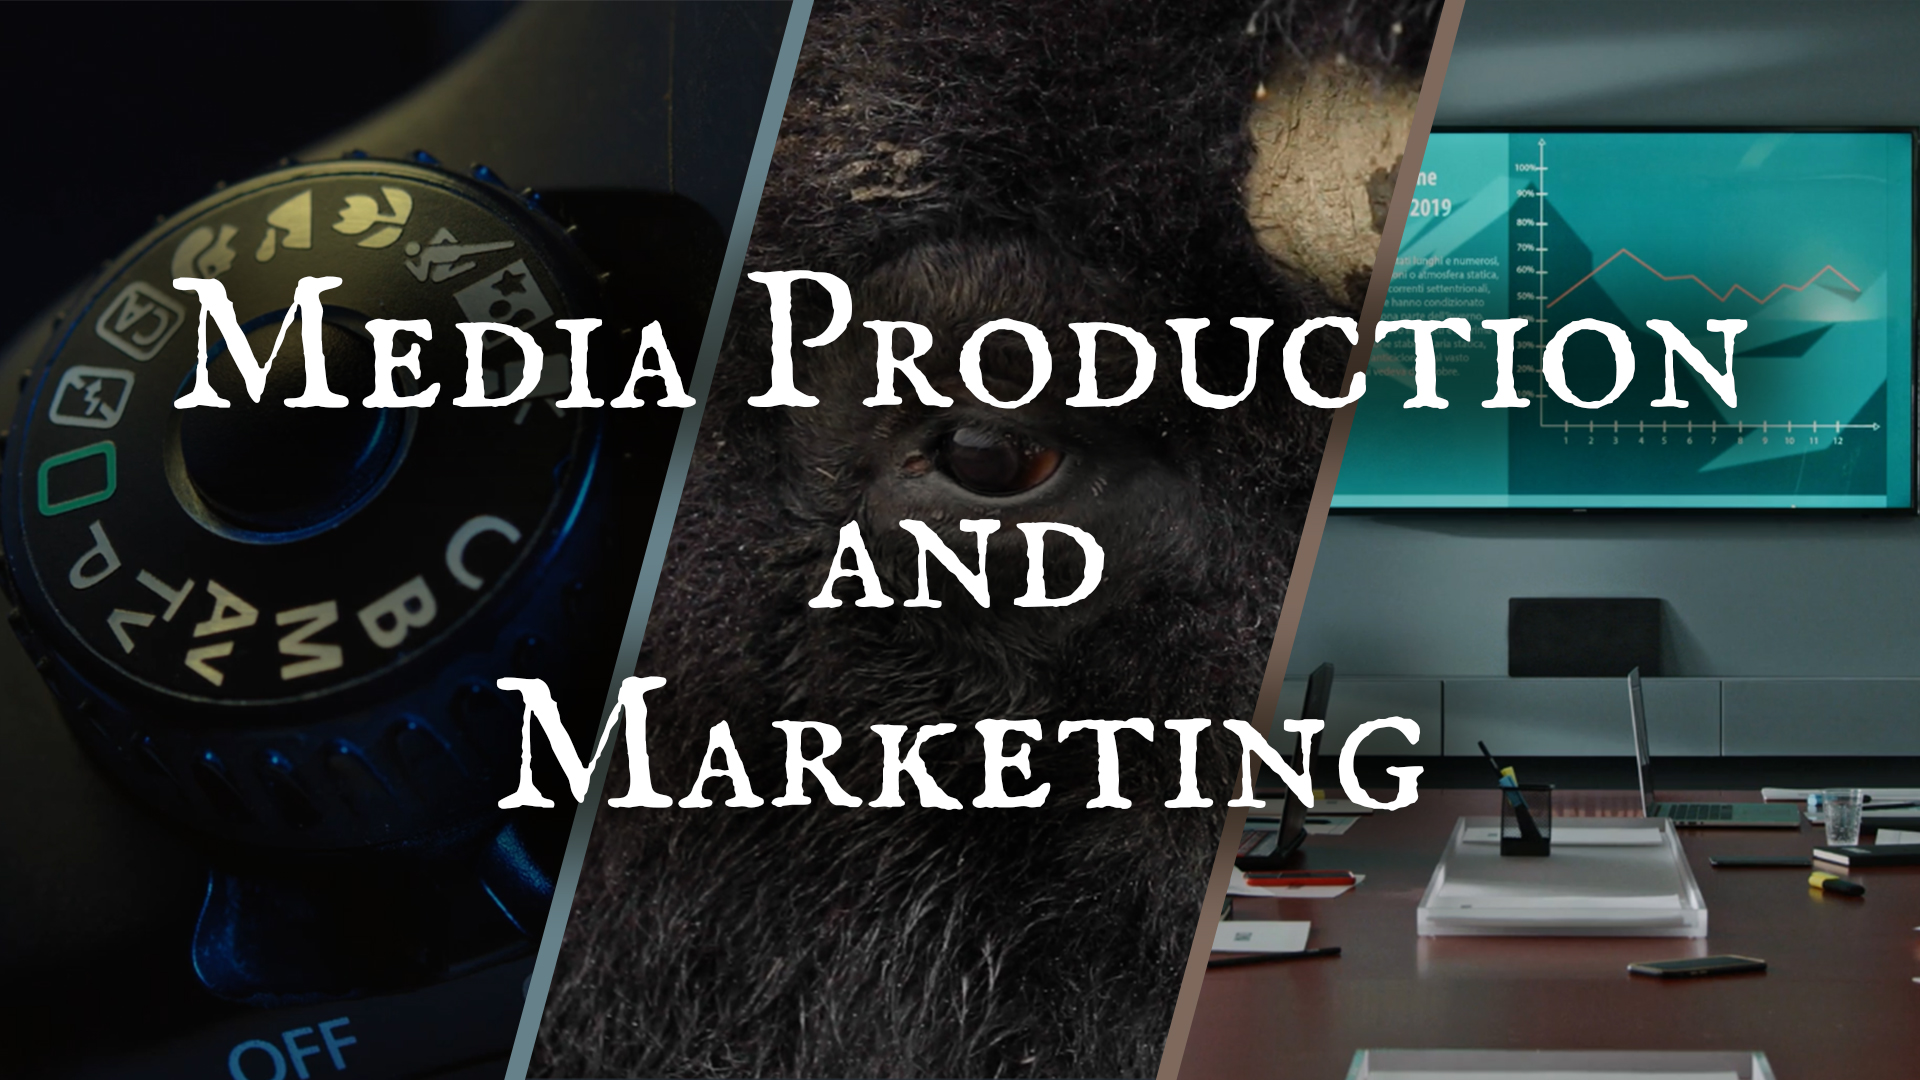 Media Production and Marketing Graphic